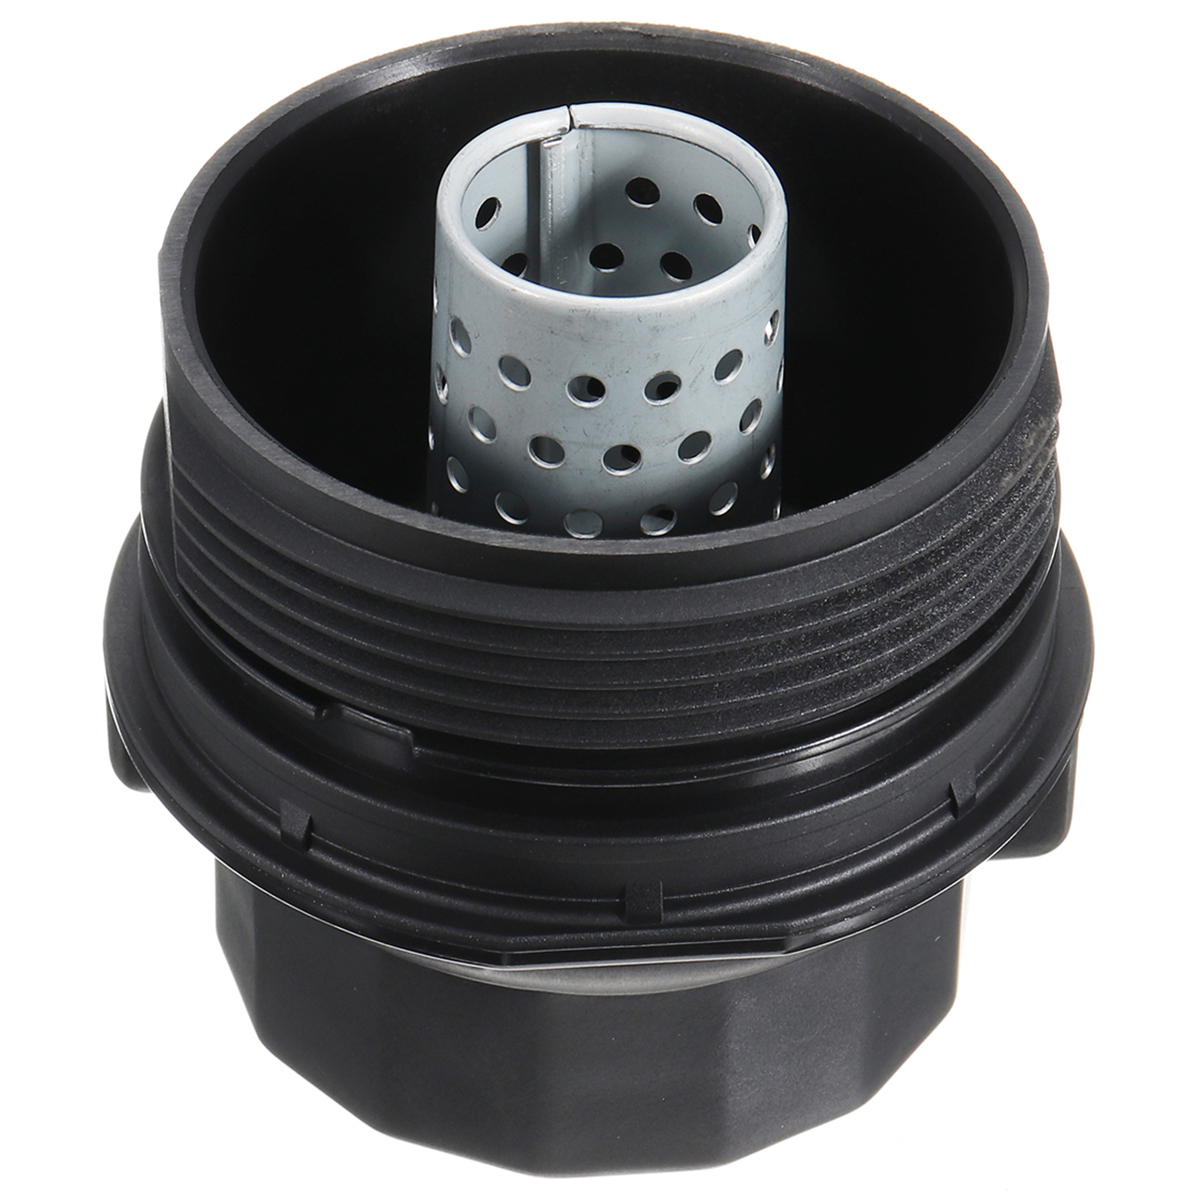 Car Oil Filter Cap Housing Cap New Universal For Toyota For Lexus Black Scion Assembly Oil Filter In Car Tank Cover 15620-3701